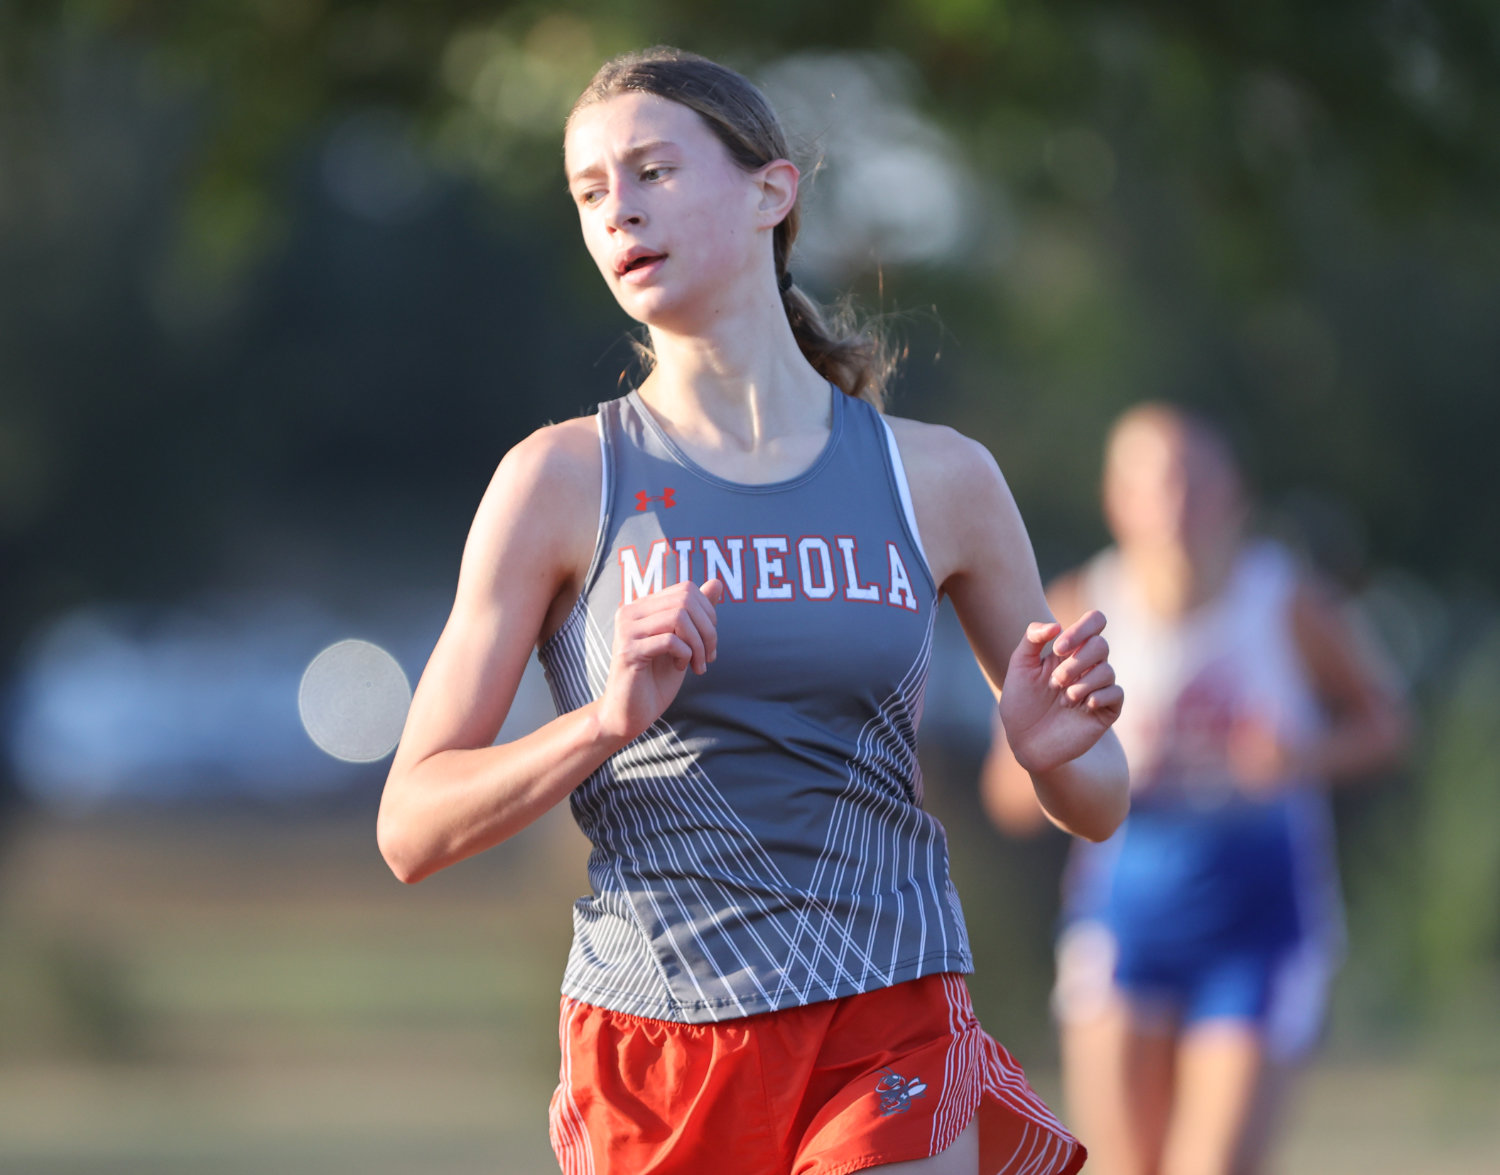 Mineola runner Olivia Hughes led the Lady Jackets with a second place finish in 13:11 Saturday at NTCC.